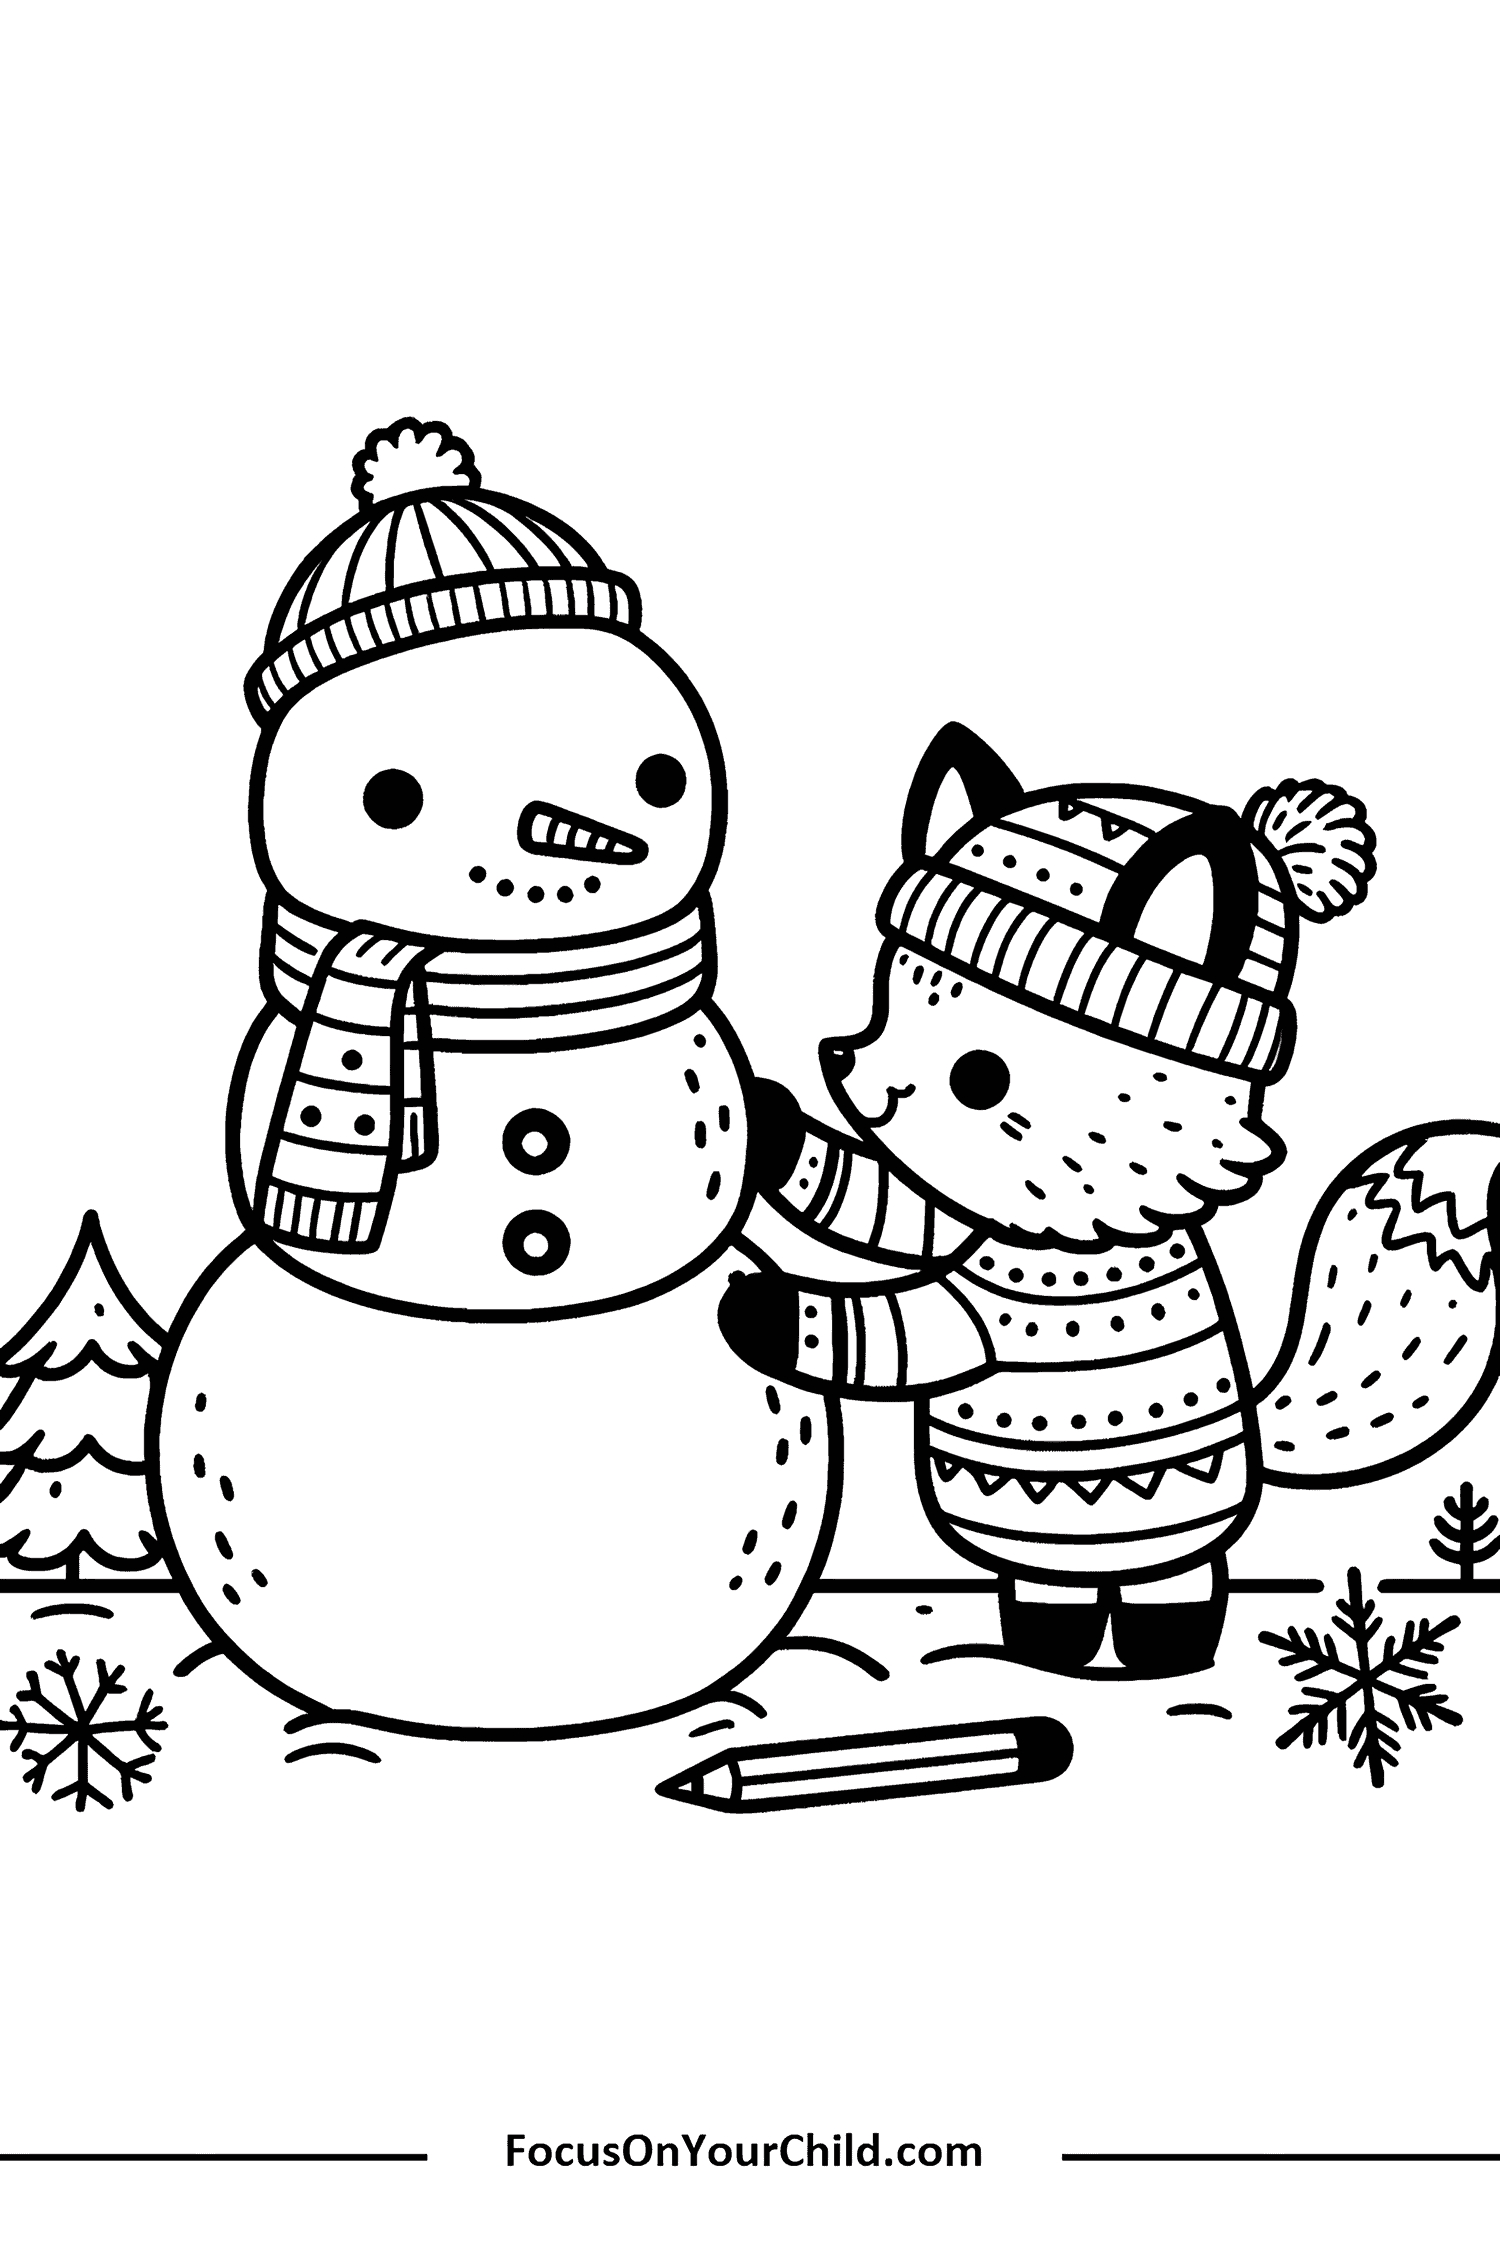 Whimsical winter scene with snowman and fox, perfect for kids coloring activities.